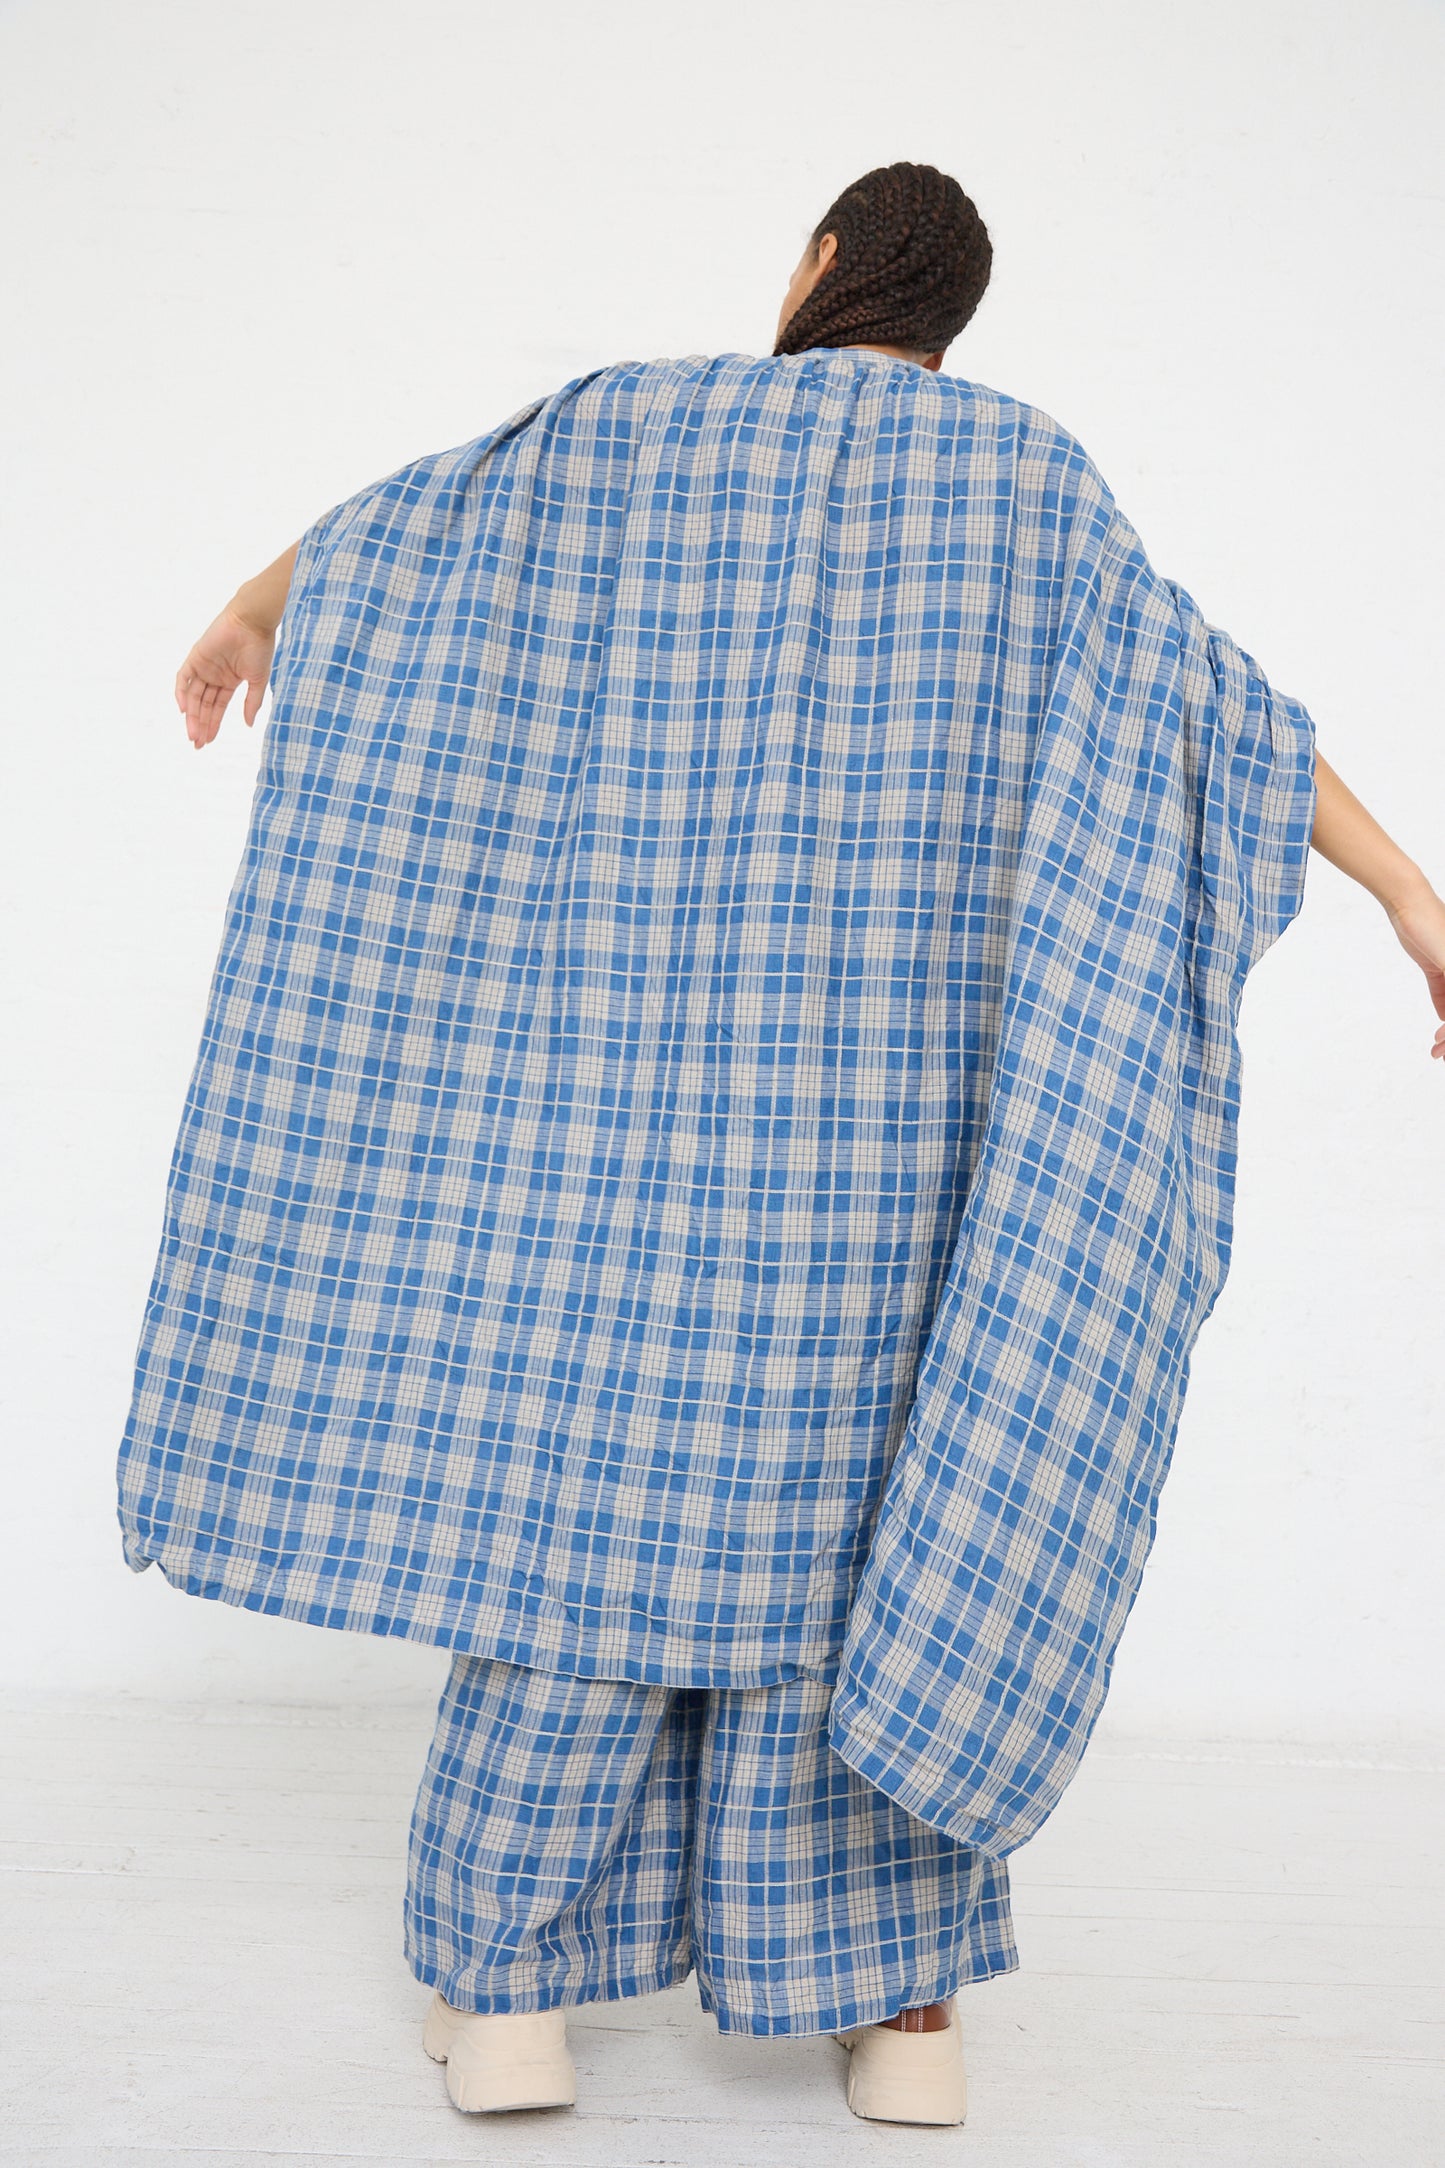 Person draped in a Linen Check Dress in Dark Indigo and Natural Linen from Ichi Antiquités standing against a white background.